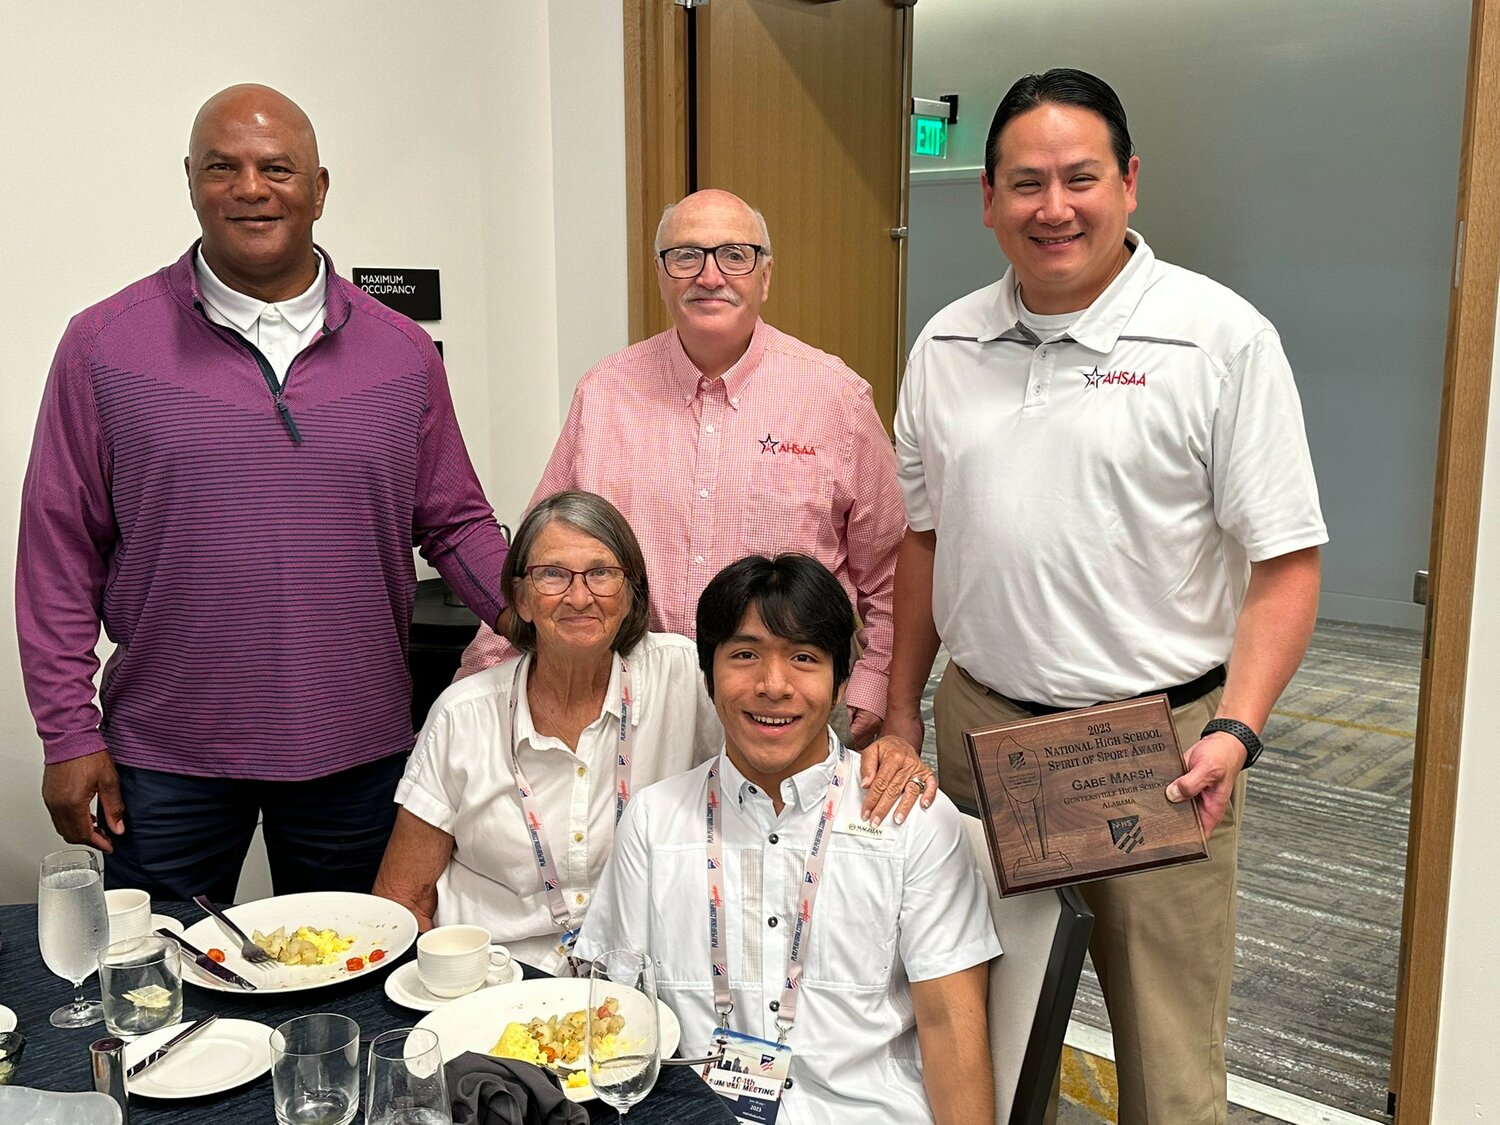 Gabe Marsh and his mother Ann with AHSAA Executive Director Alvin Briggs, Marvin Chou and Ron Ingram at Wednesday’s Spirit of Sport/Heart of the Arts Breakfast at the NFHS Summer Meeting in Seattle. Marsh is a recent graduate of Guntersville High School who won state titles at the Alabama High School Athletic Association state championships and the Alabama Para Olympics.